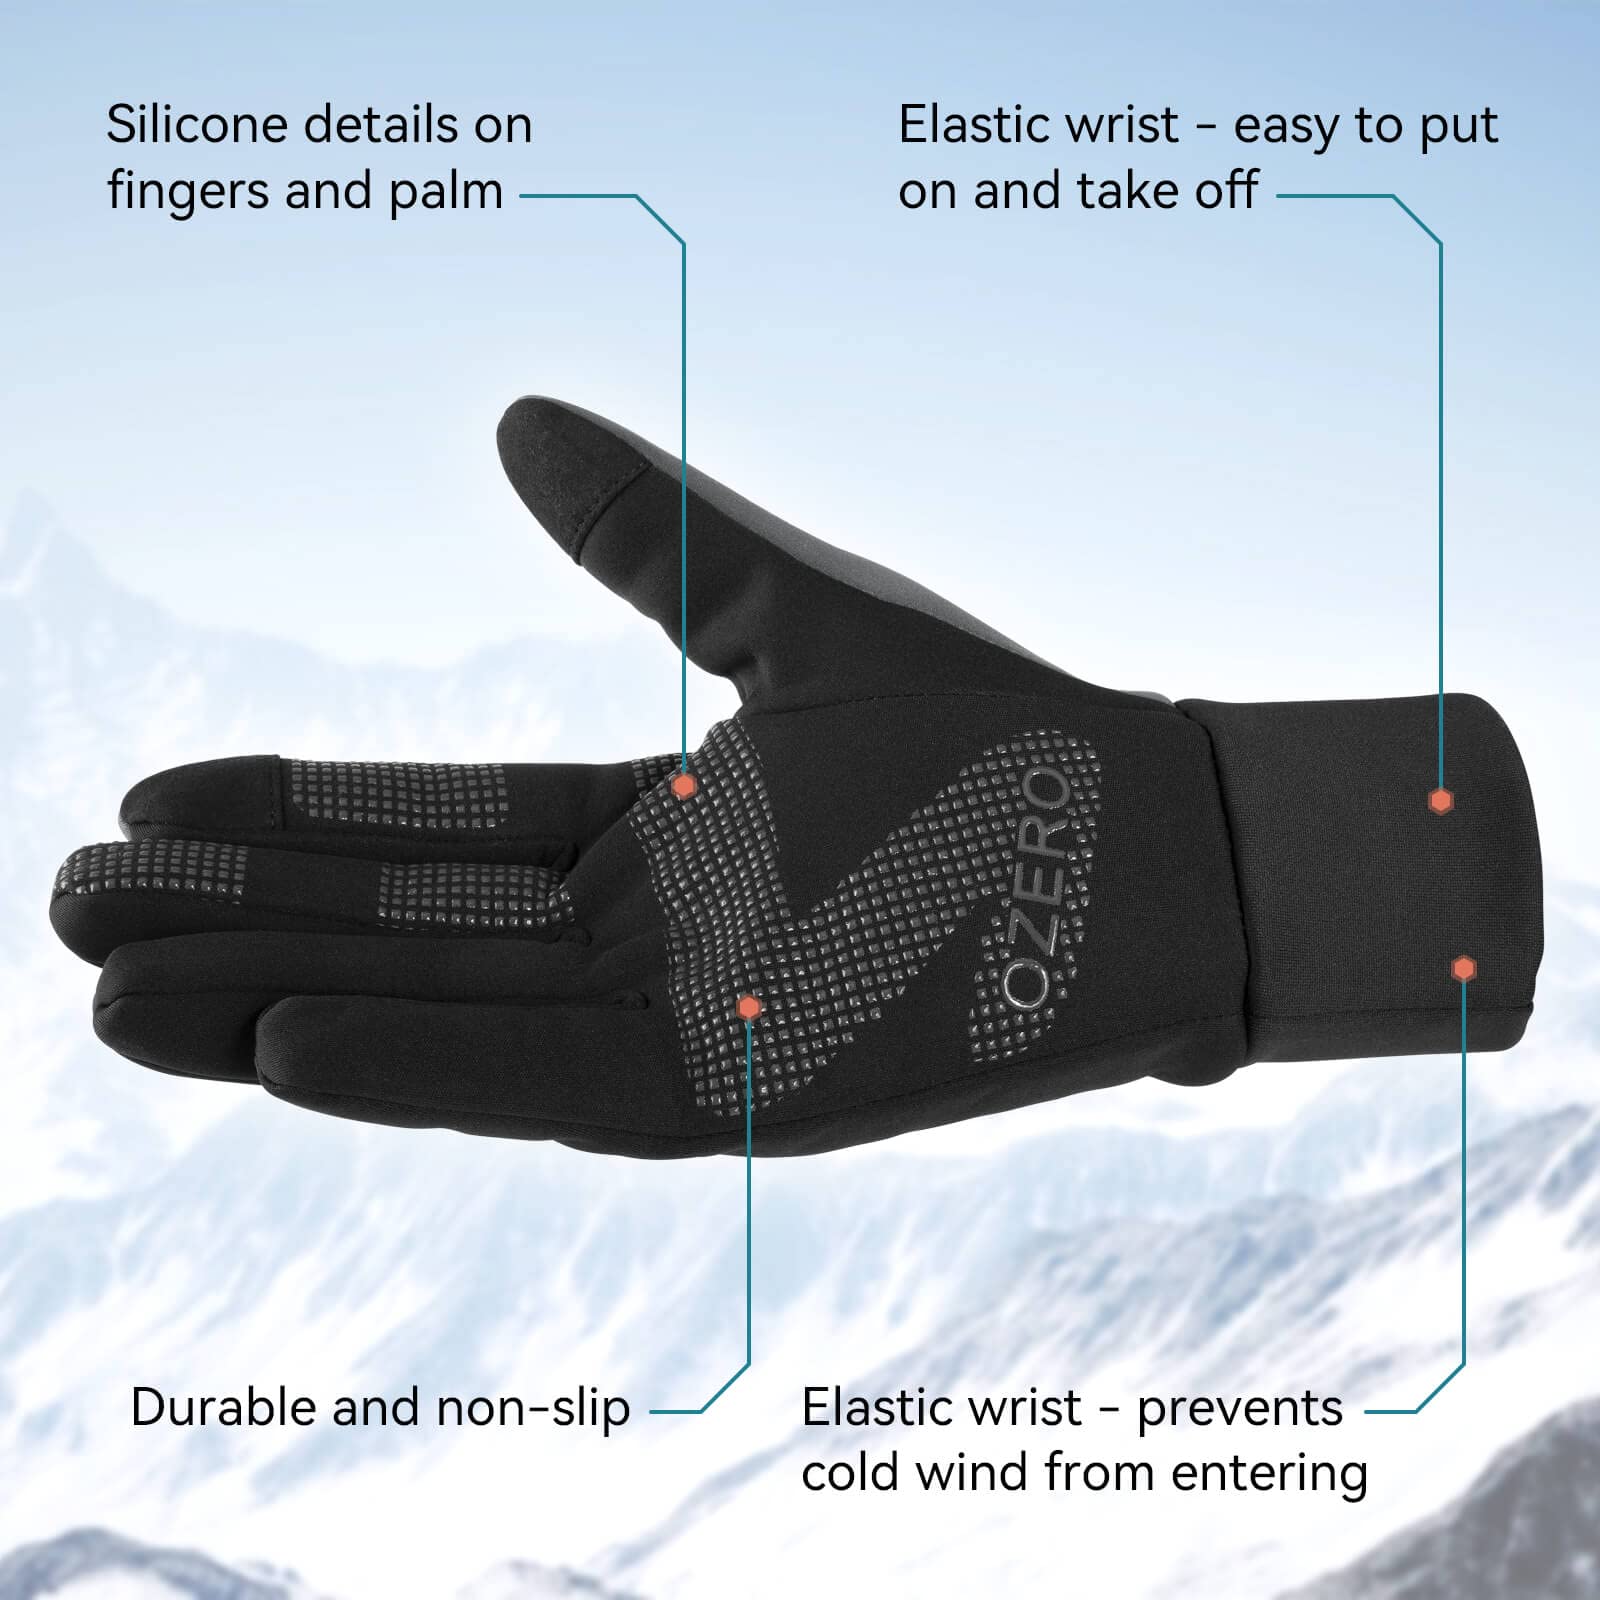 OZERO Winter Thermal Gloves Men Women Touch Screen Water Resistant Windproof Anti Slip Heated Glove Hands Warm for Hiking Driving Running Bike Cycling